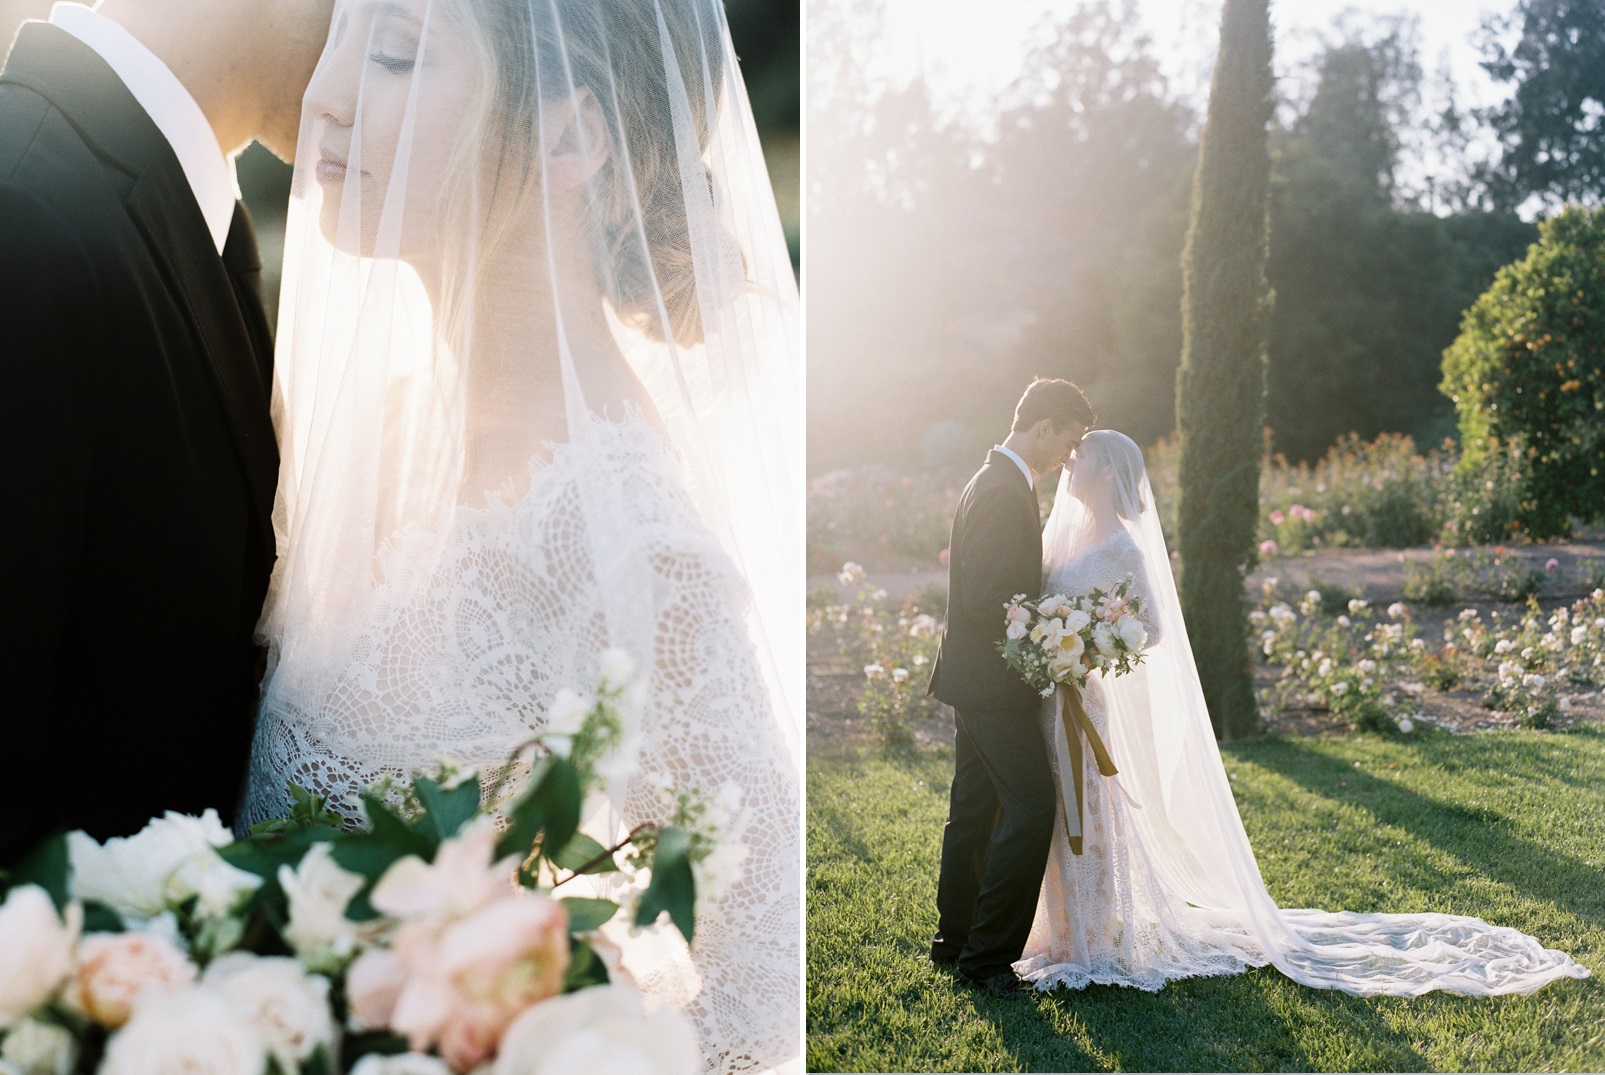 Bride & Groom - Dreamy Garden Wedding Inspiration with a Hint of Provence